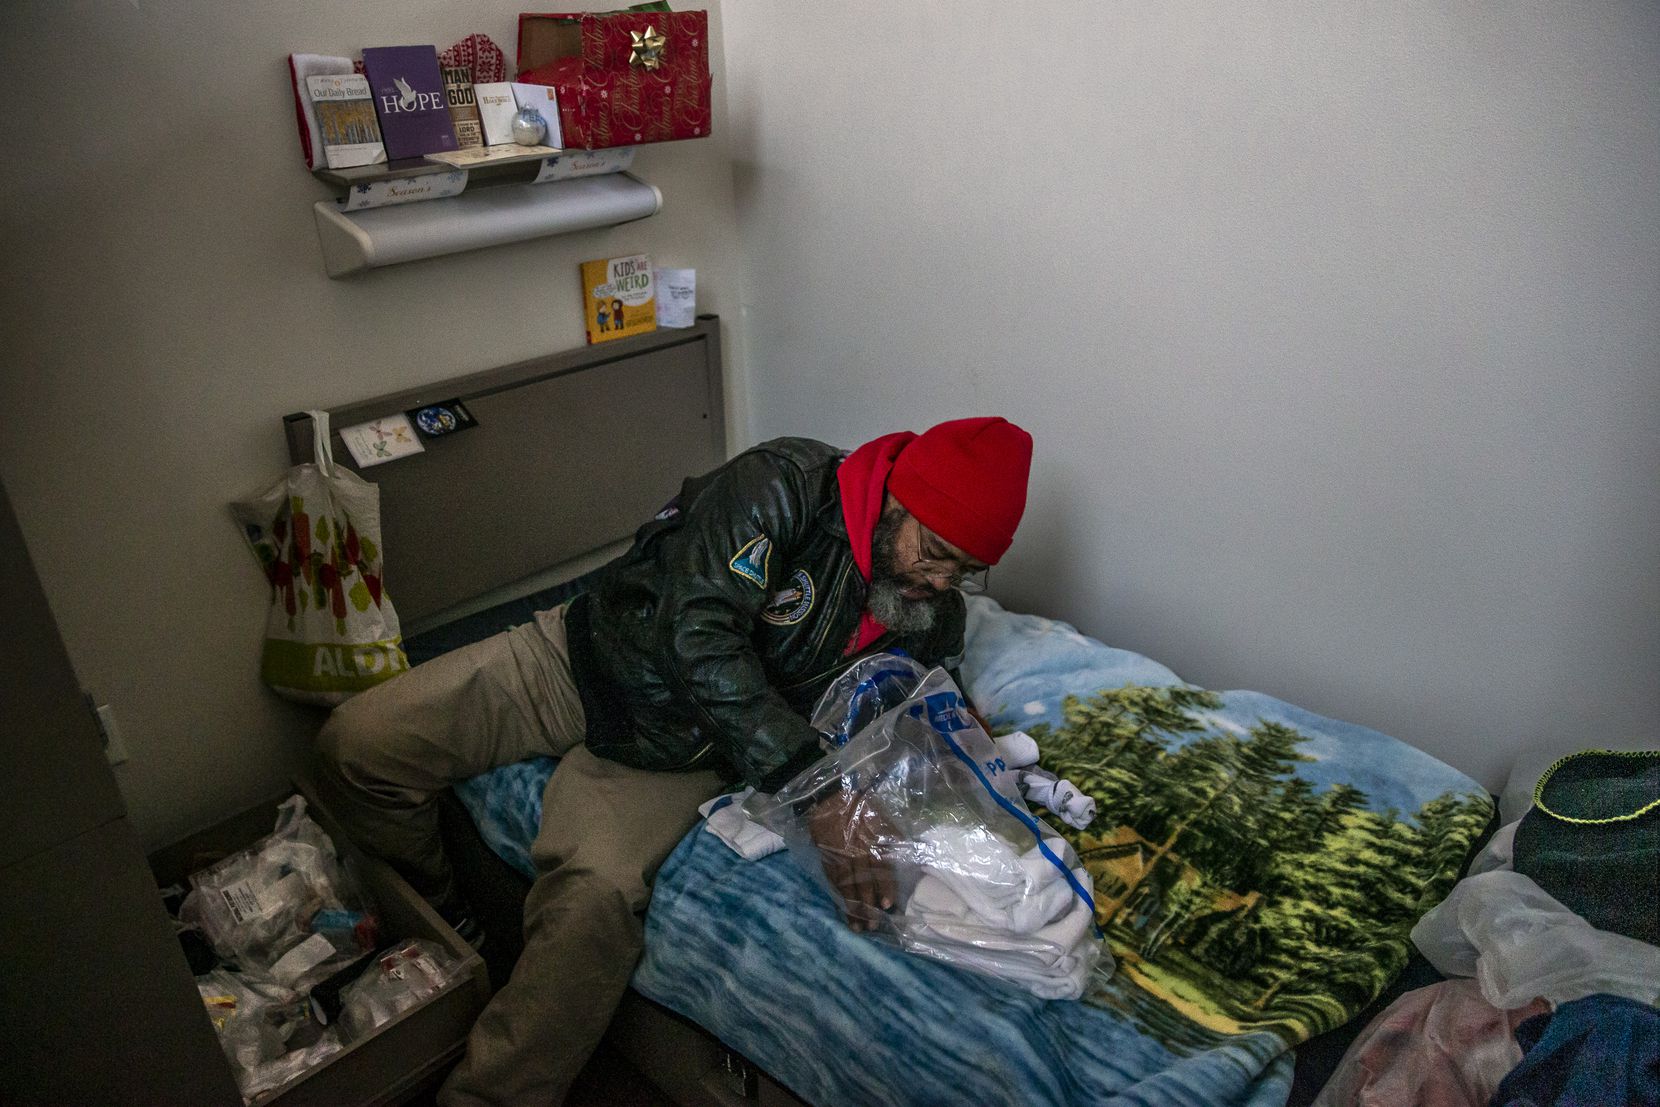 Randy organized a bag of socks on his bed to give to a friend who was also living at The Bridge Homeless Recovery Center in January 2020. “You really have to do as bests as you can by each other,” he said.